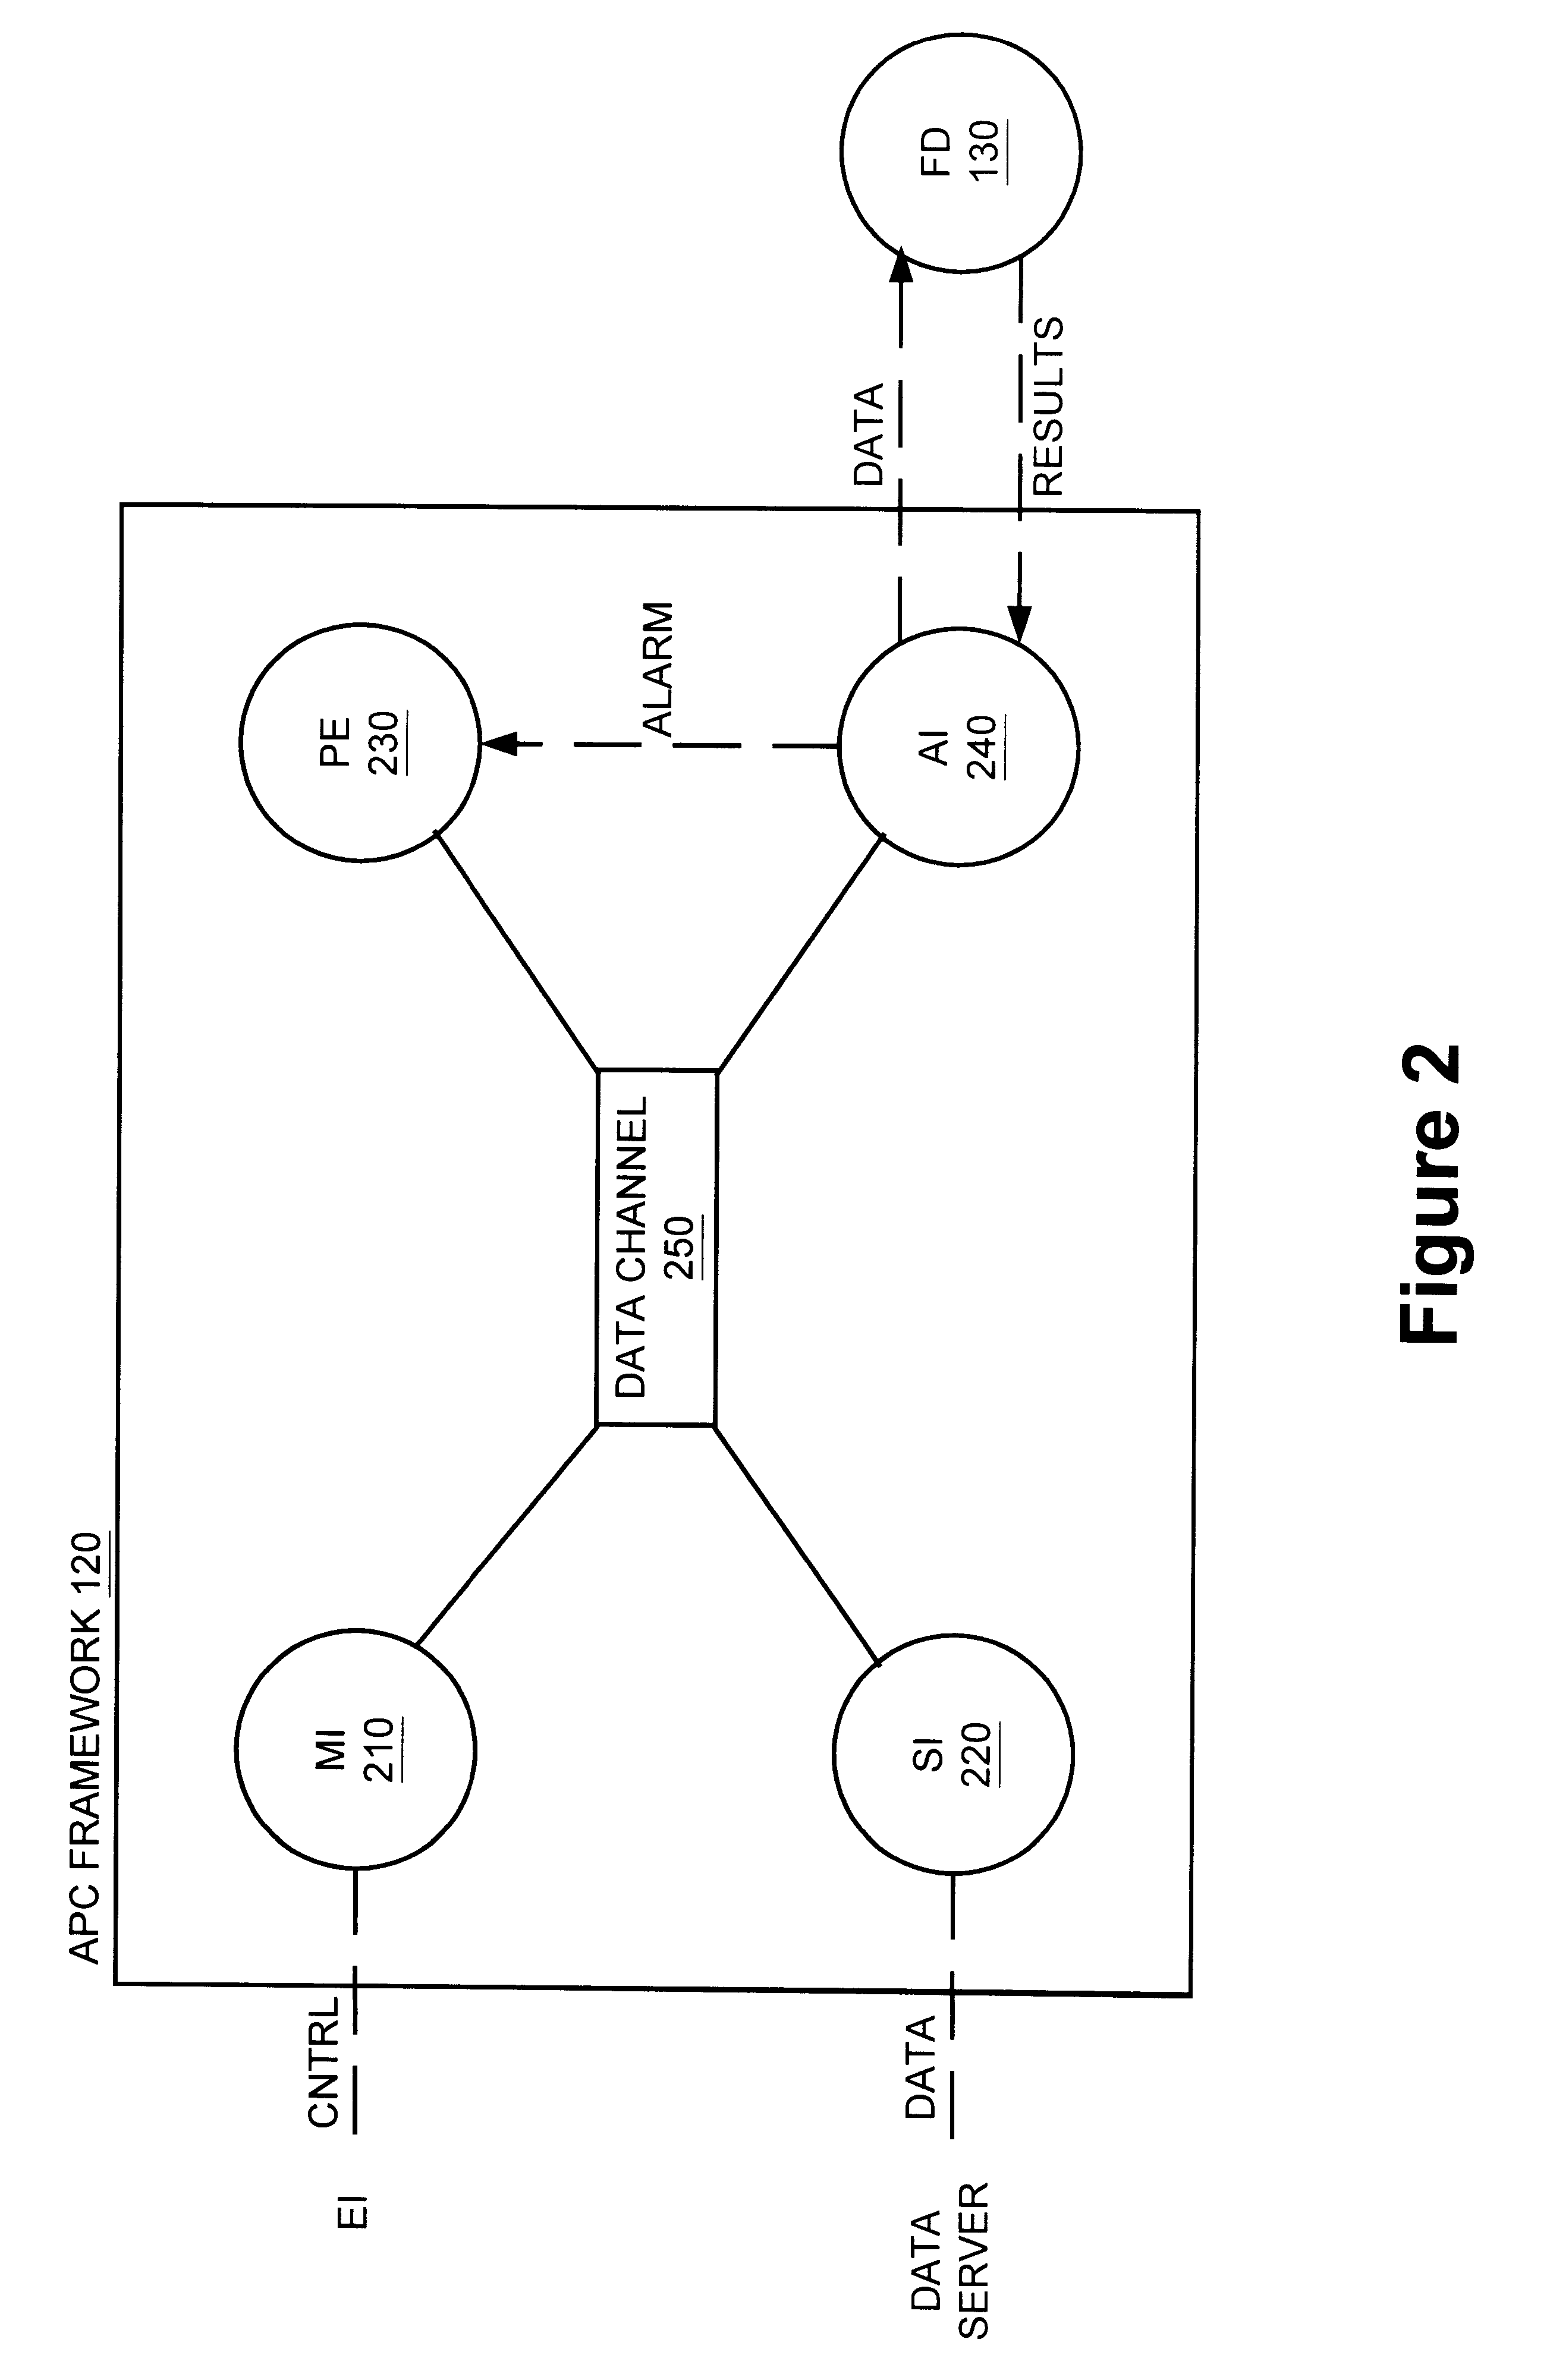 Method and apparatus for the integration of sensor data from a process tool in an advanced process control (APC) framework